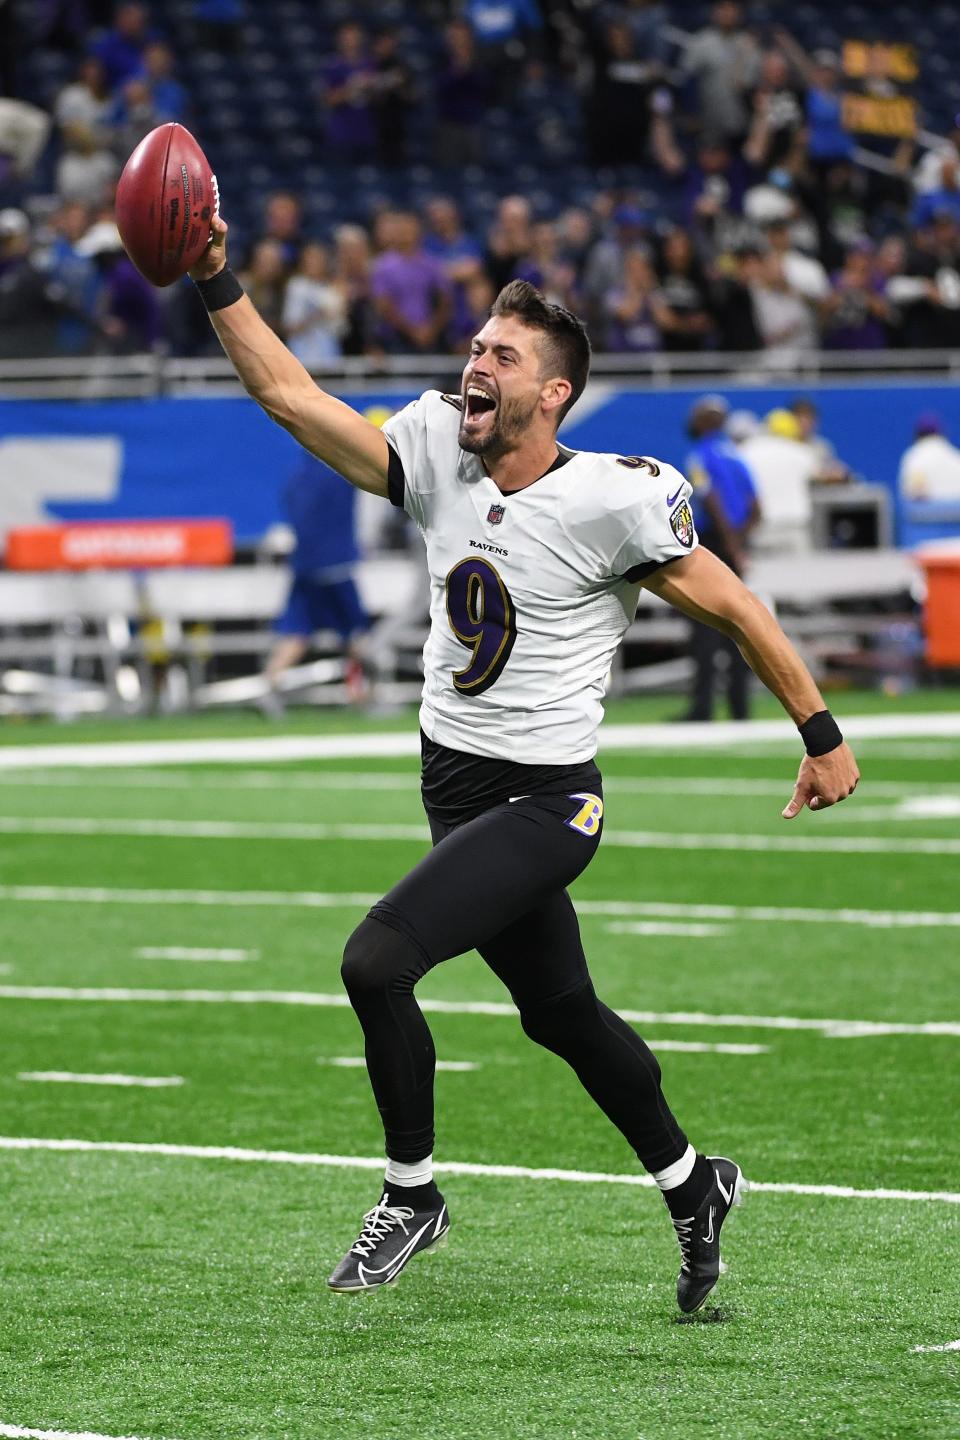 Baltimore Ravens kicker Justin Tucker celebrates his winning field goal to defeat the Detroit Lions, 19-17, at Ford Field on Sept.26, 2021 in Detroit.